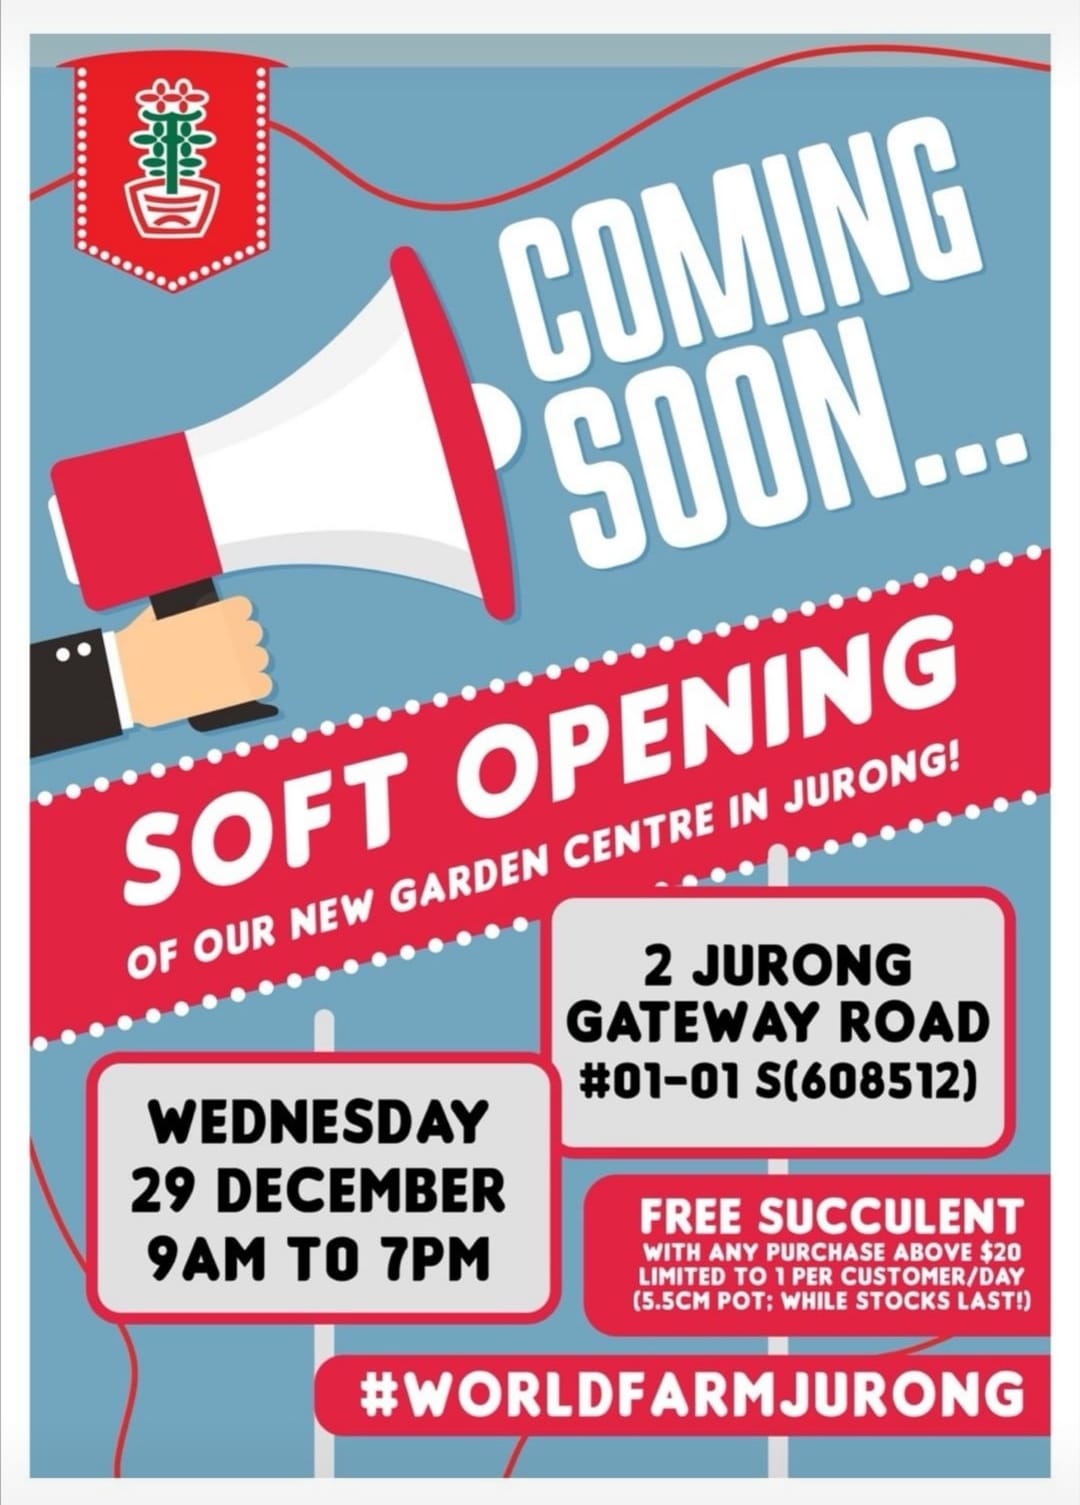 World Farm Plant Nursery To Open New Outlet At Jurong On 29 Dec 21, Gives Free Succulent With Purchase Above $20 - 3